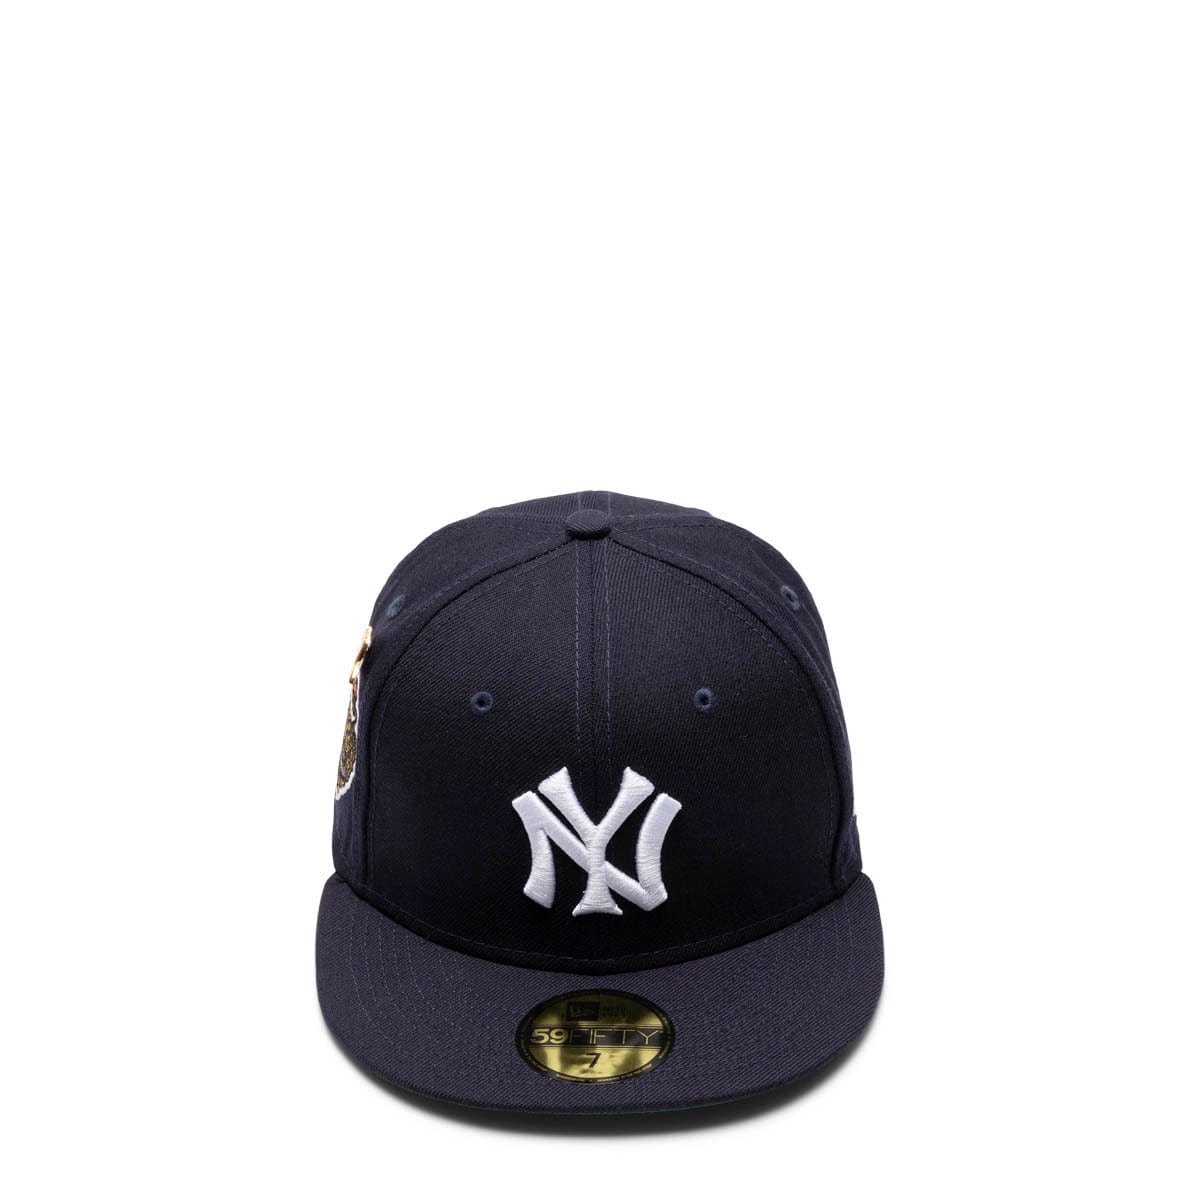 New Era 59FIFTY NEW YORK YANKEES (1927) LOGO HISTORY FITTED CAP NAVY